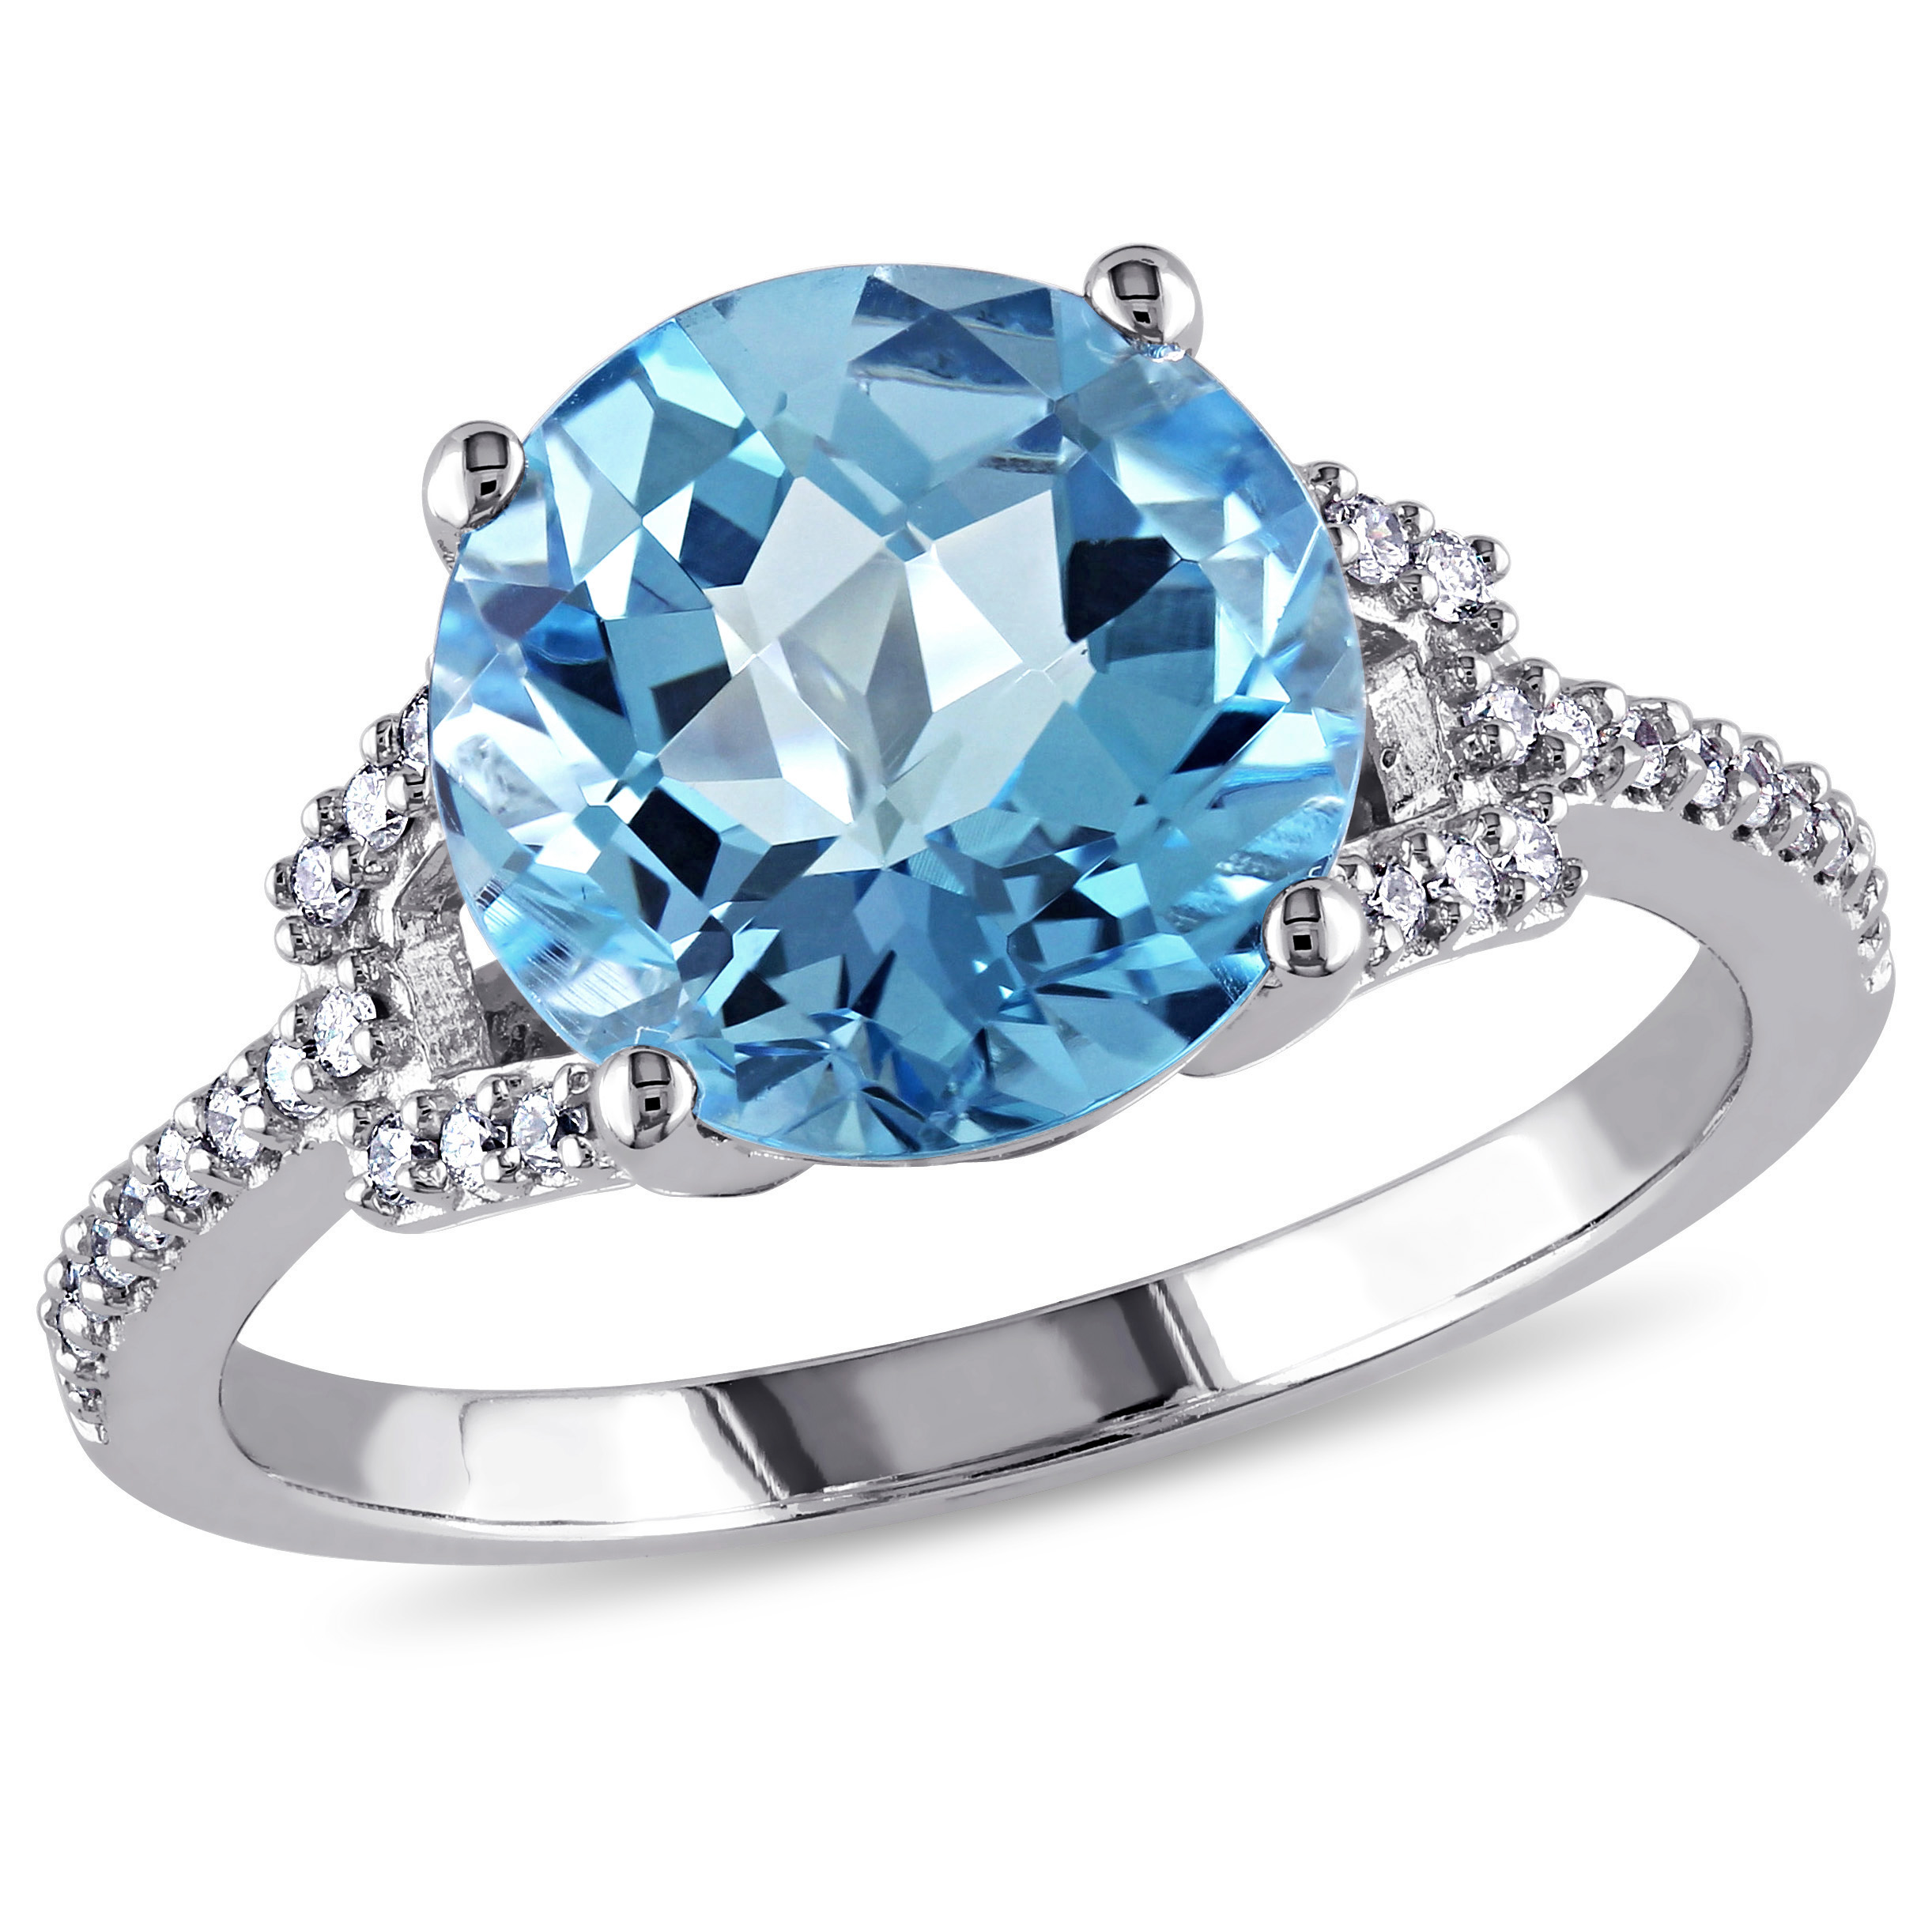 1/6 CT TW Diamond and 4 3/5 CT TGW Swiss Blue Topaz Sollitaire Ring in 14k White Gold